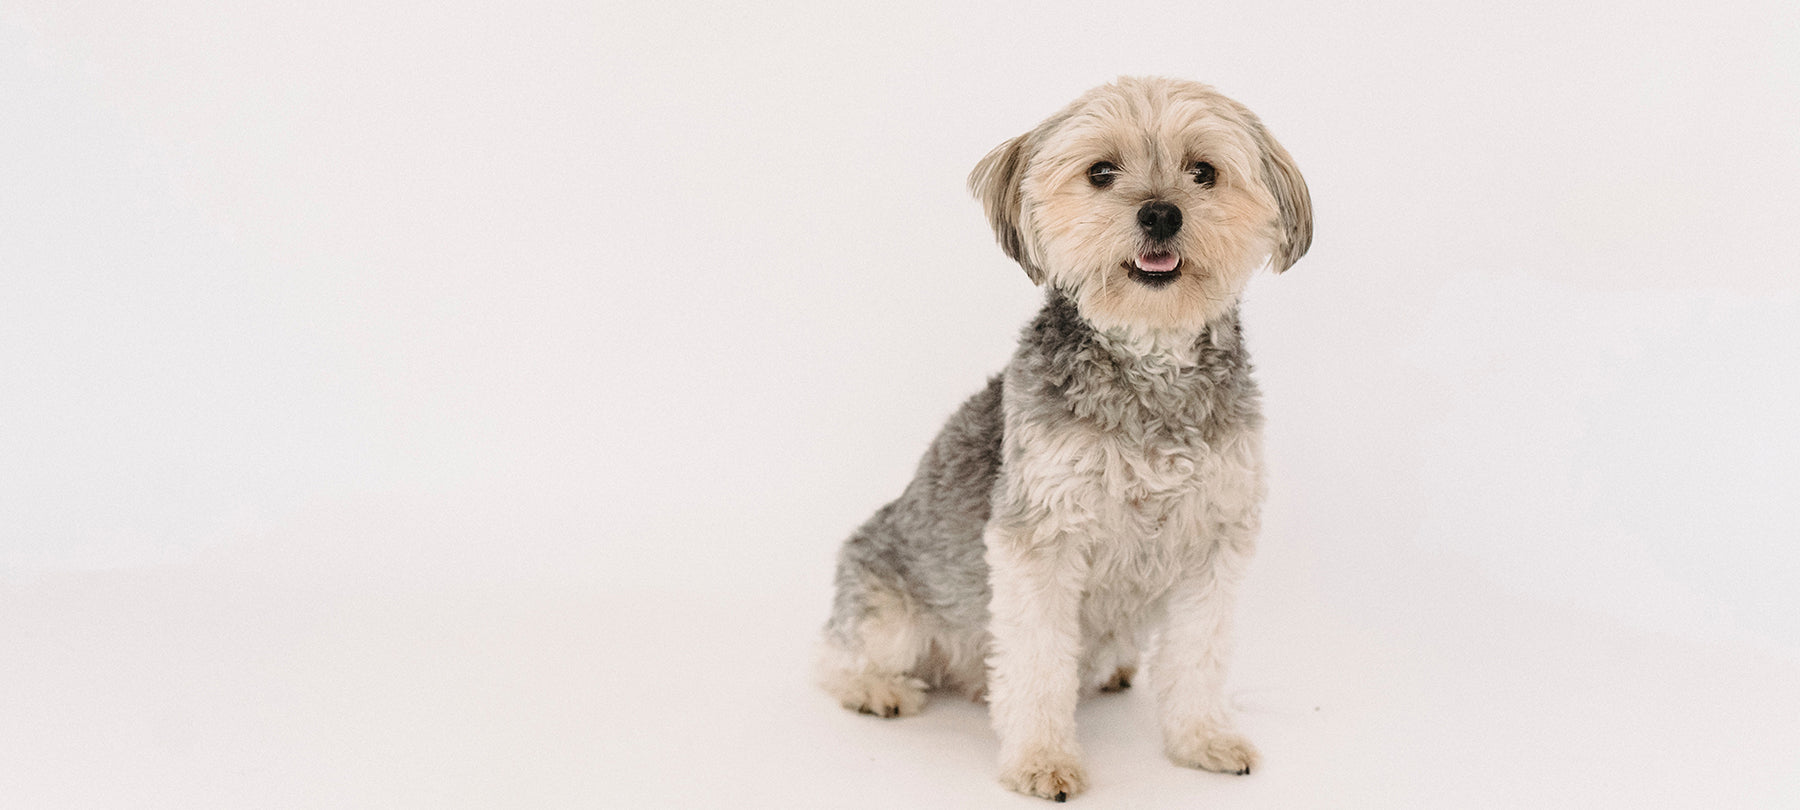 Small dog on a white background.